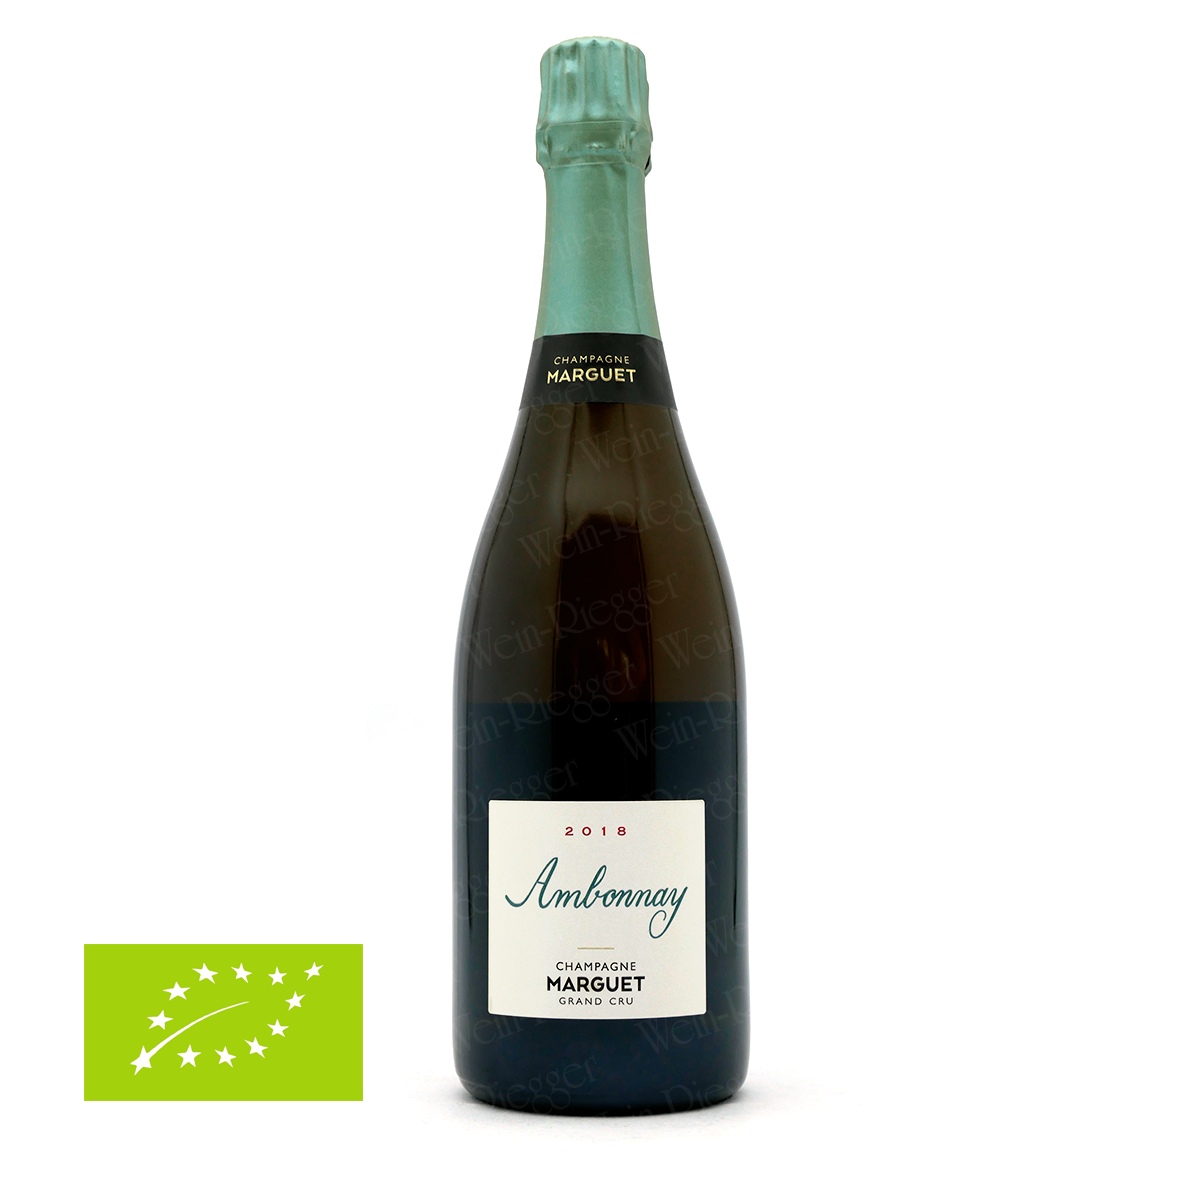 Champagner on special occasions | wein.plus Find+Buy